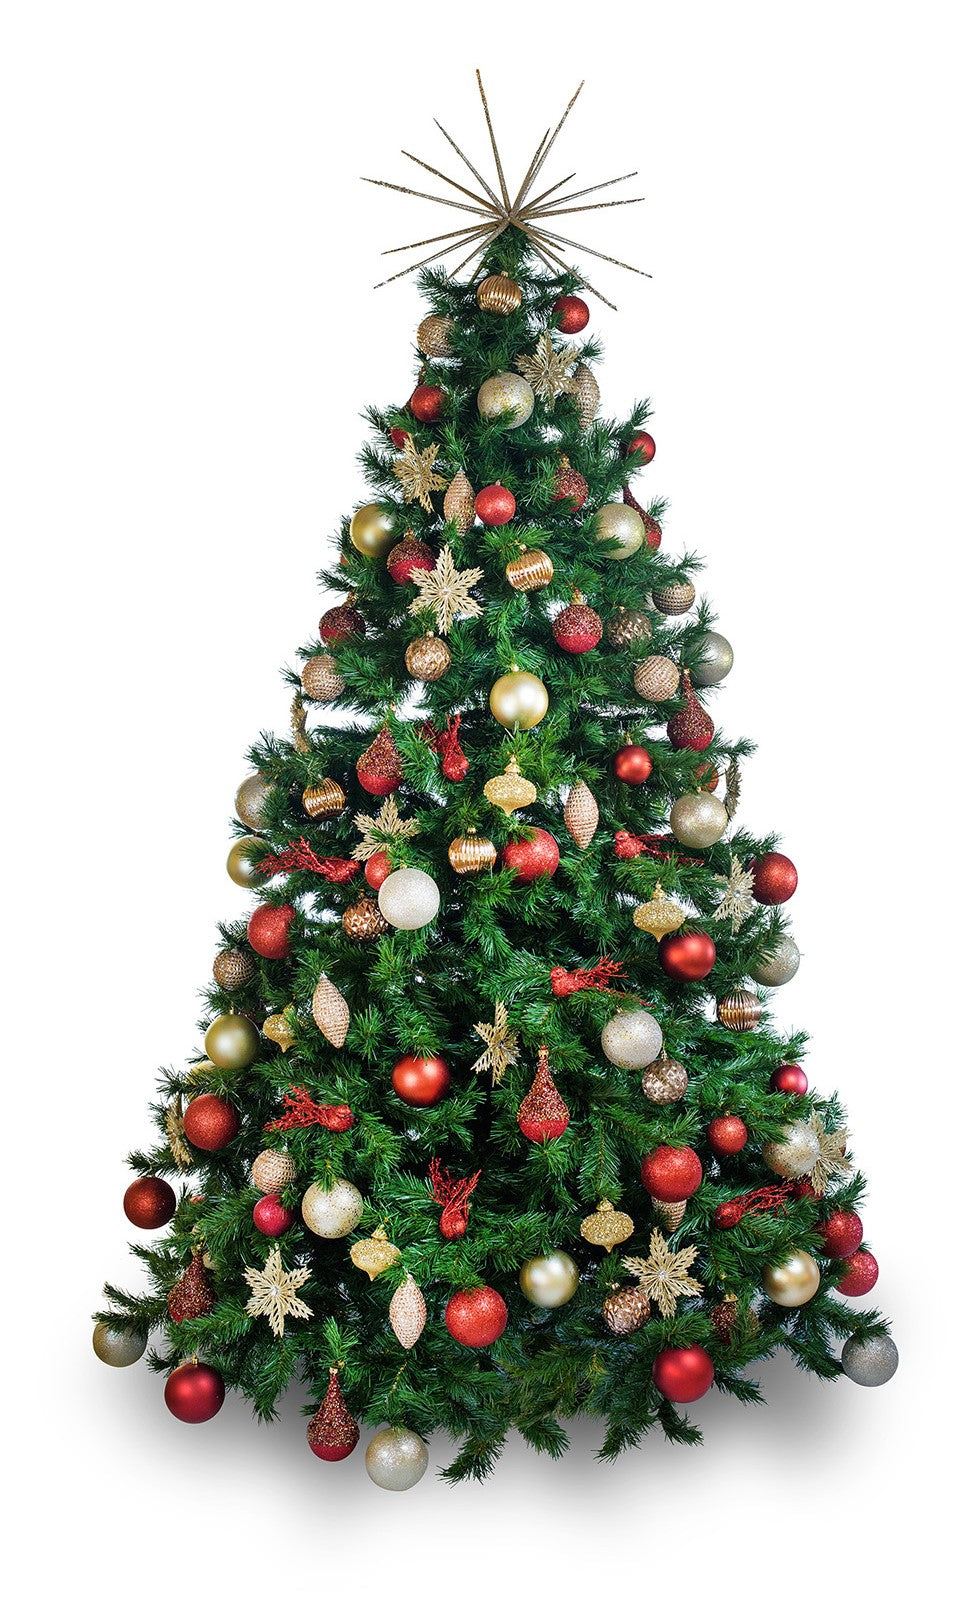 Professionally decorated Christmas tree hire Melbourne. Large sizes available for homes, offices, commercial and events.